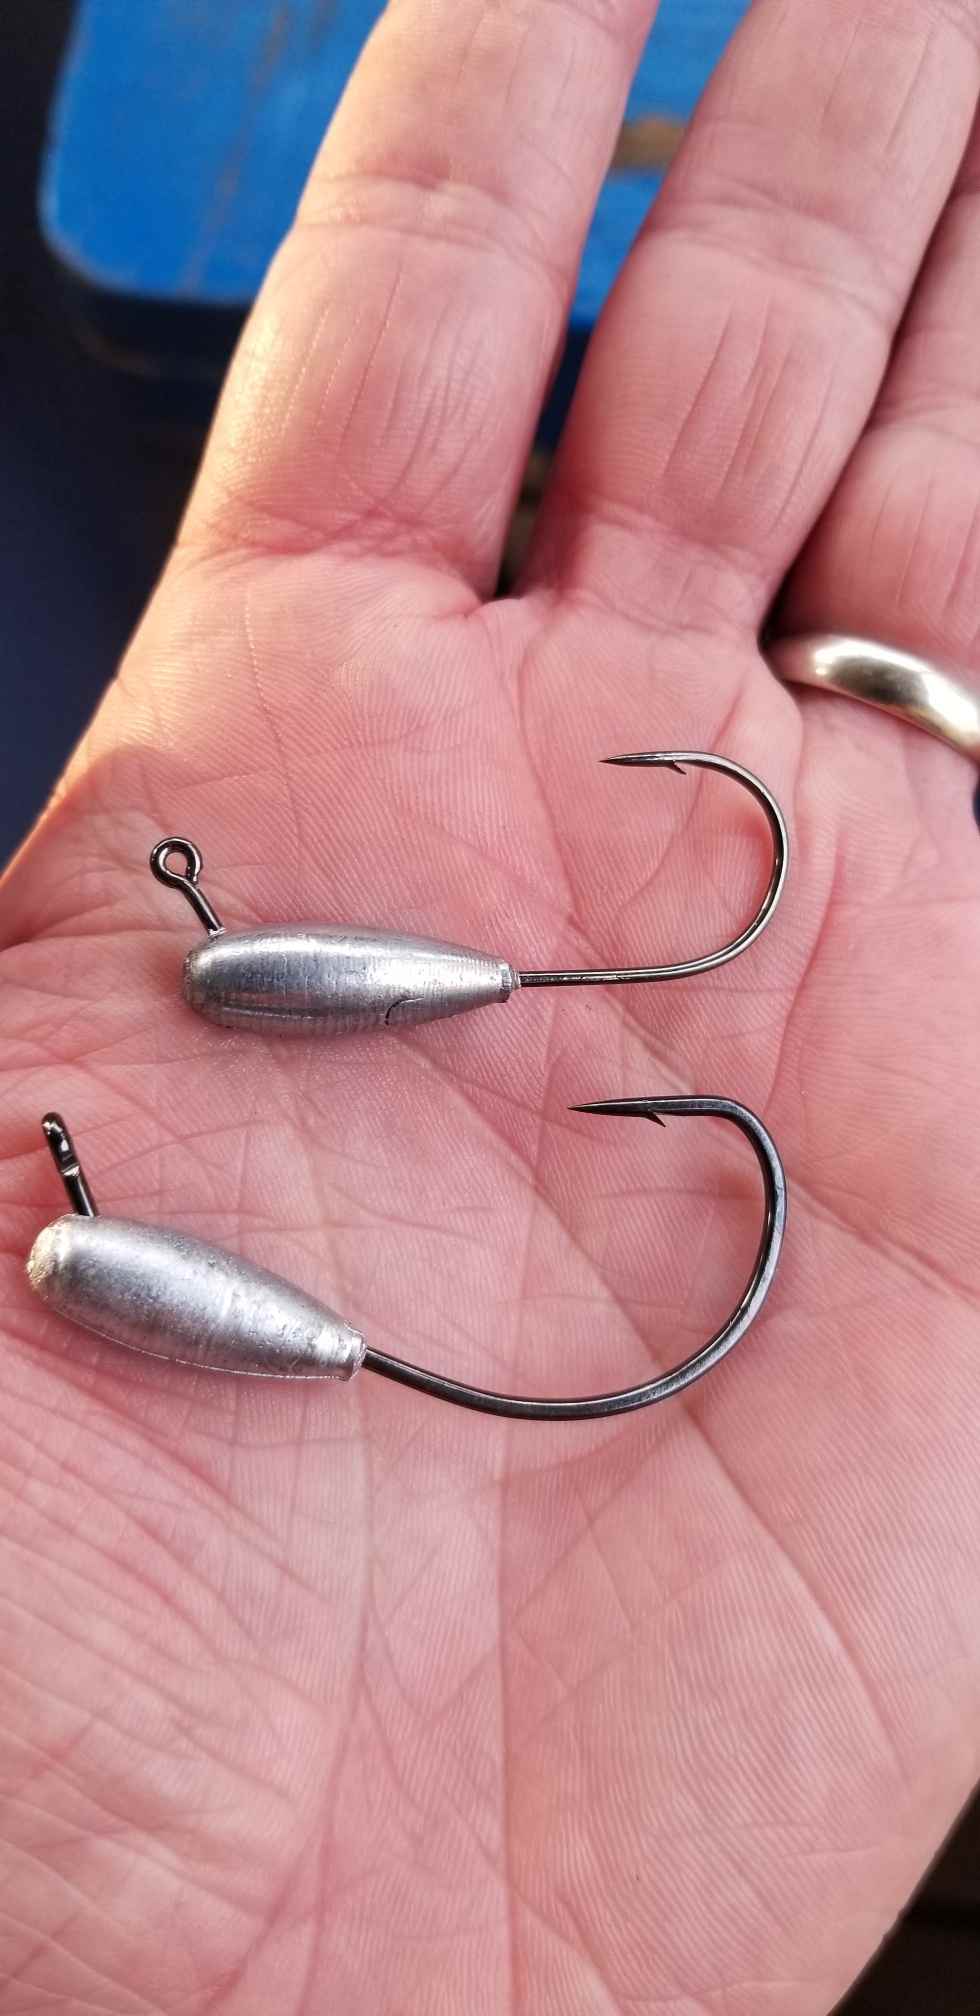 A Tube Bait Question - Fishing Tackle - Bass Fishing Forums